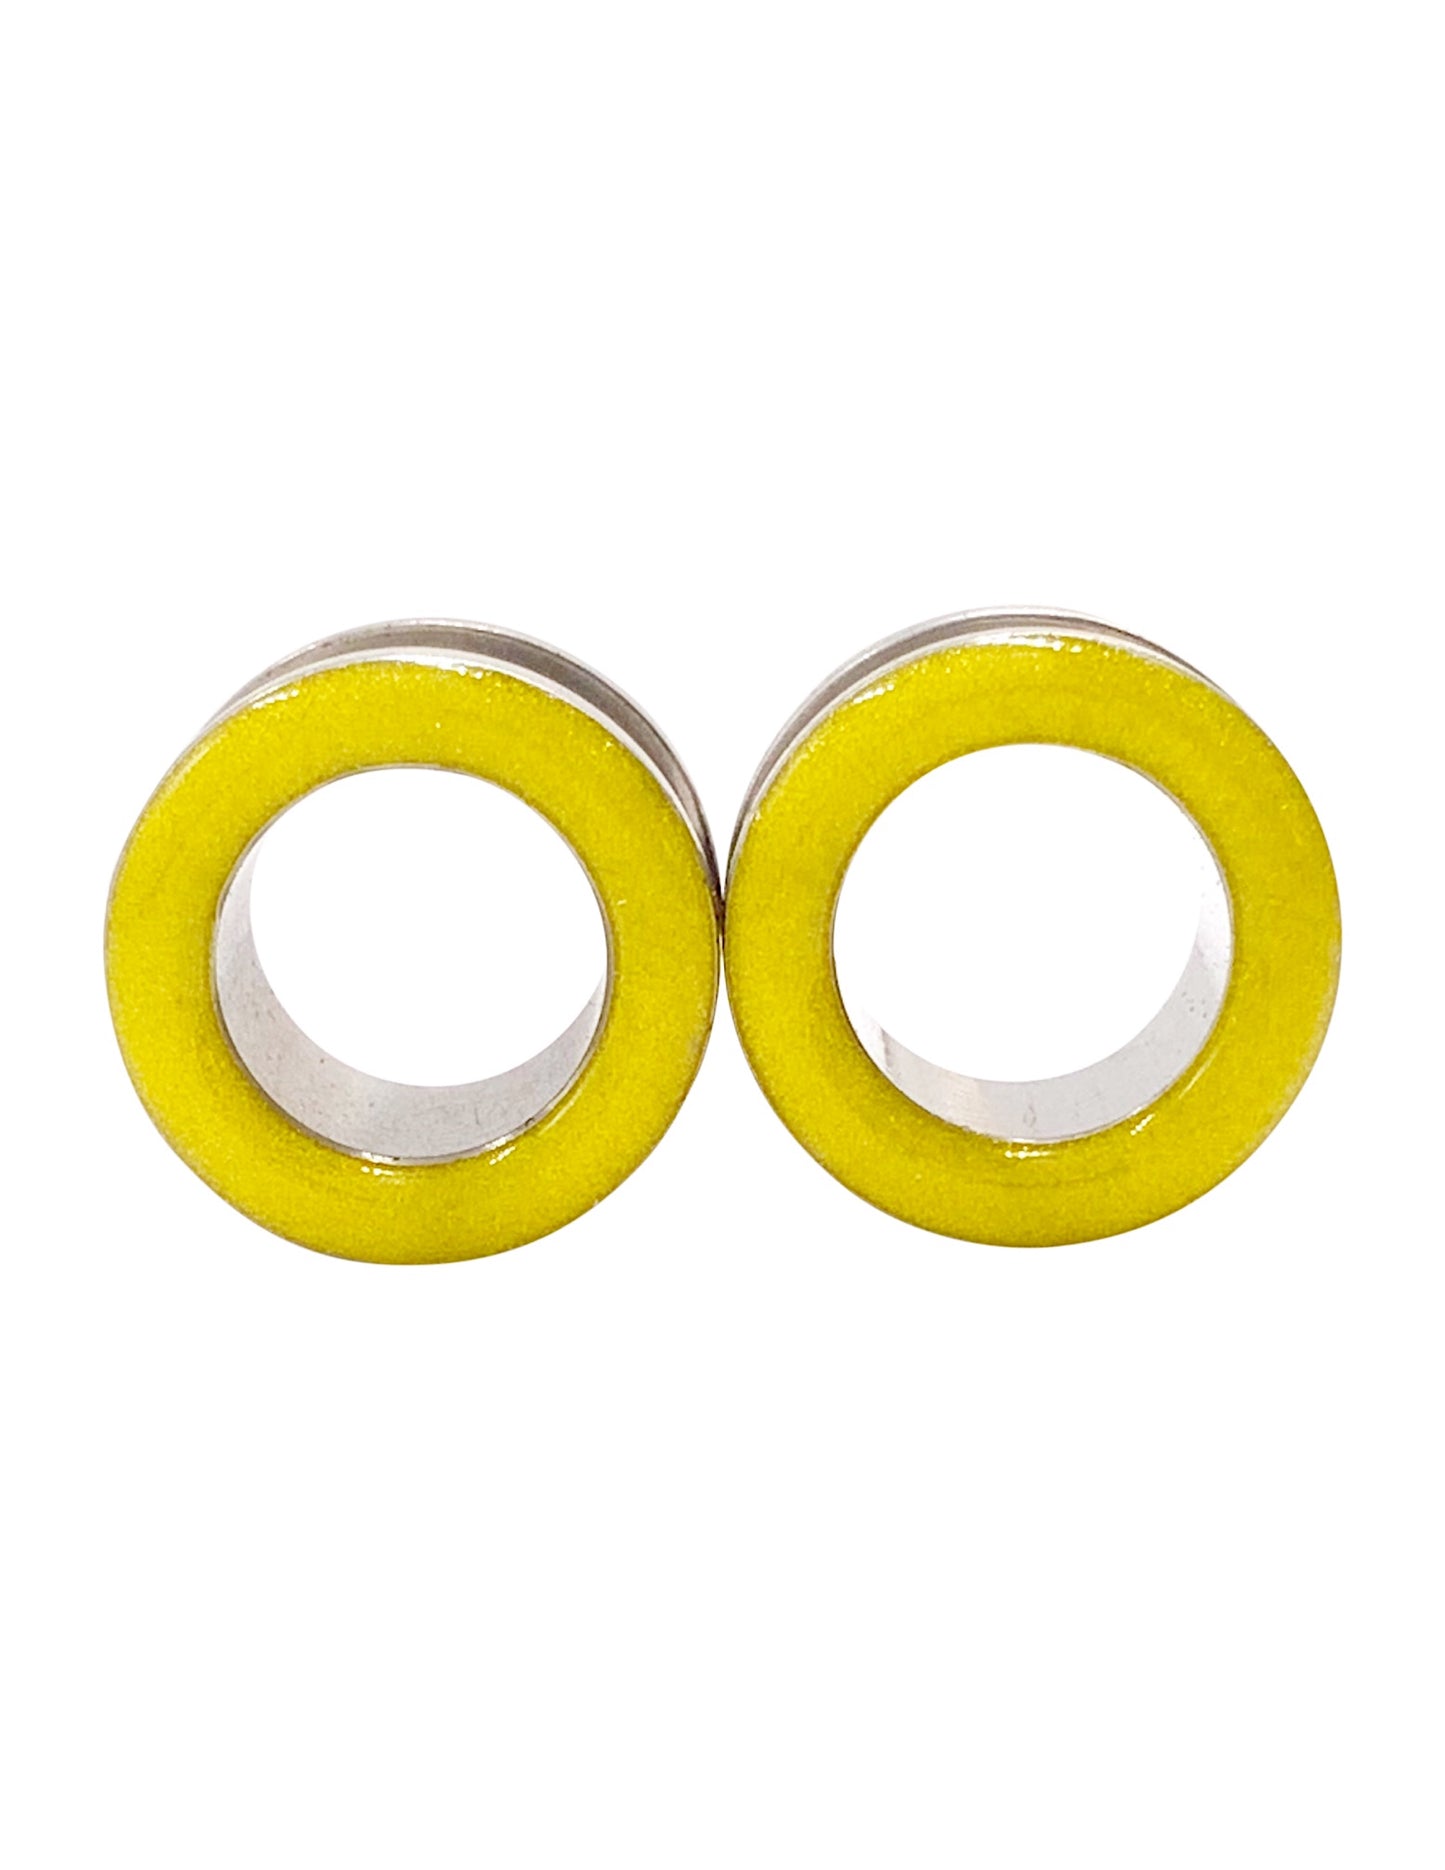 Sunny Yellow Shimmer Tunnel Plugs